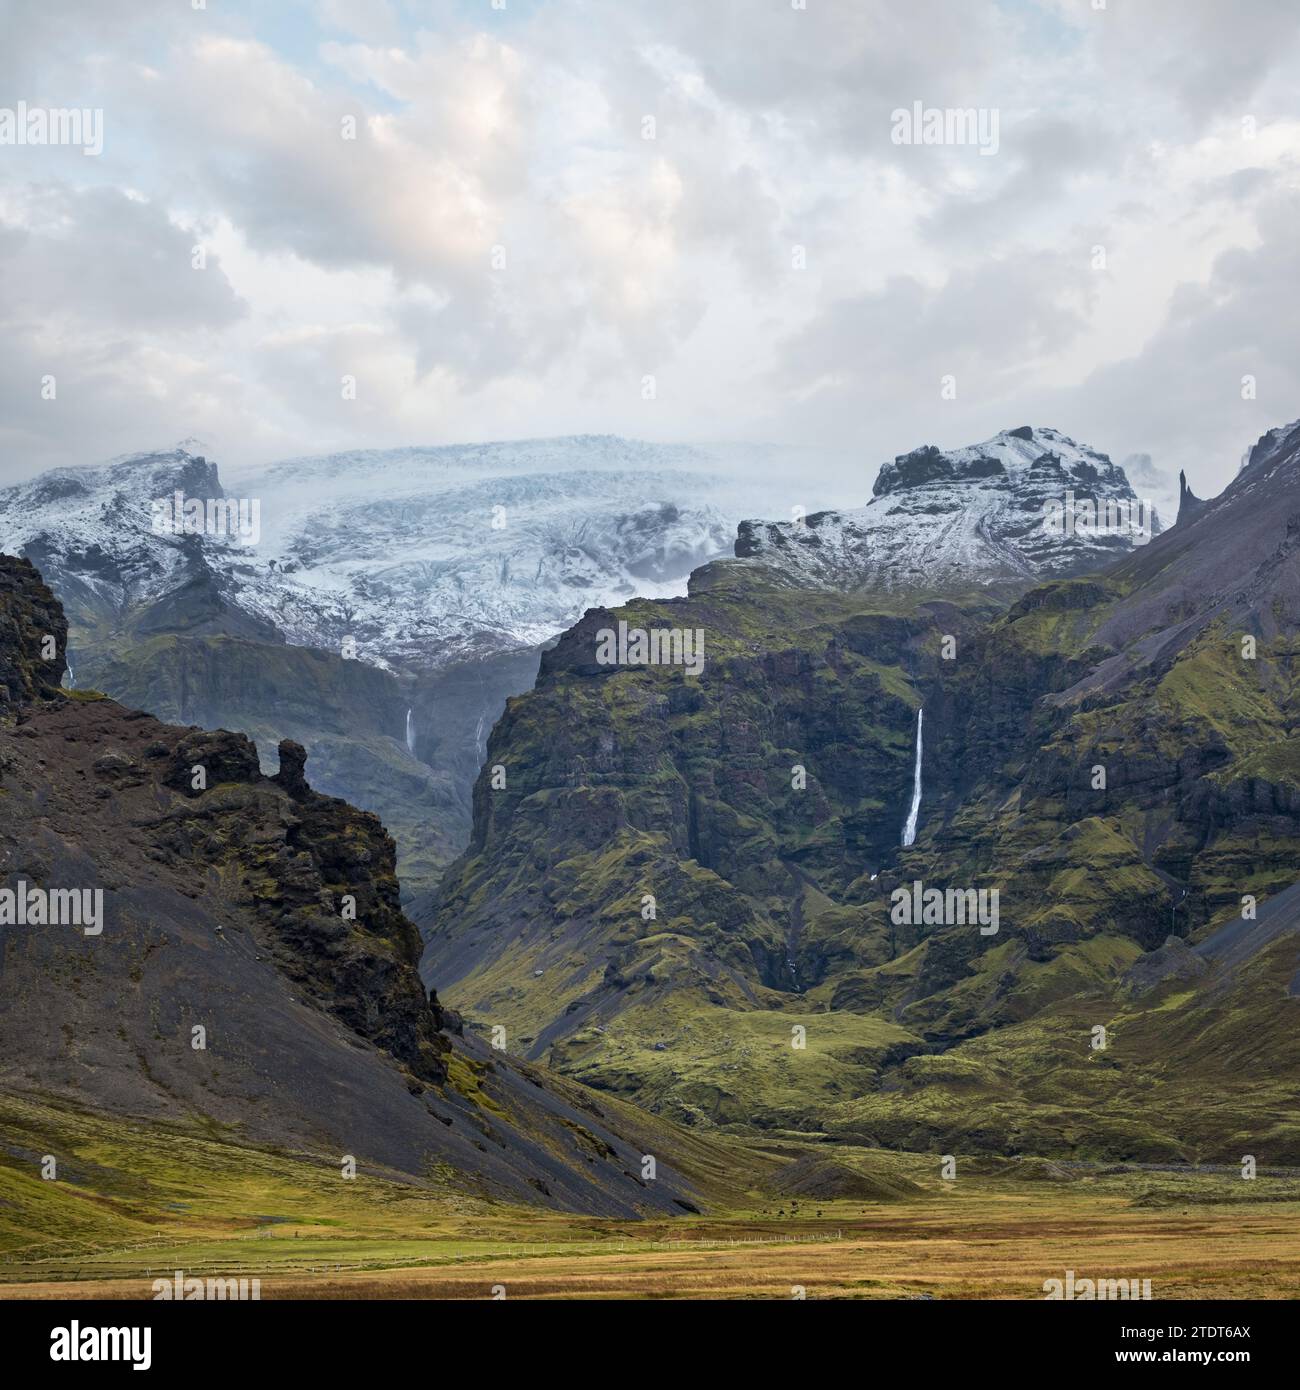 View from highway to Mulagljufur Canyon during auto trip in Iceland. Spectacular Icelandic landscape with  scenic nature: mountains, fjords, glaciers, Stock Photo